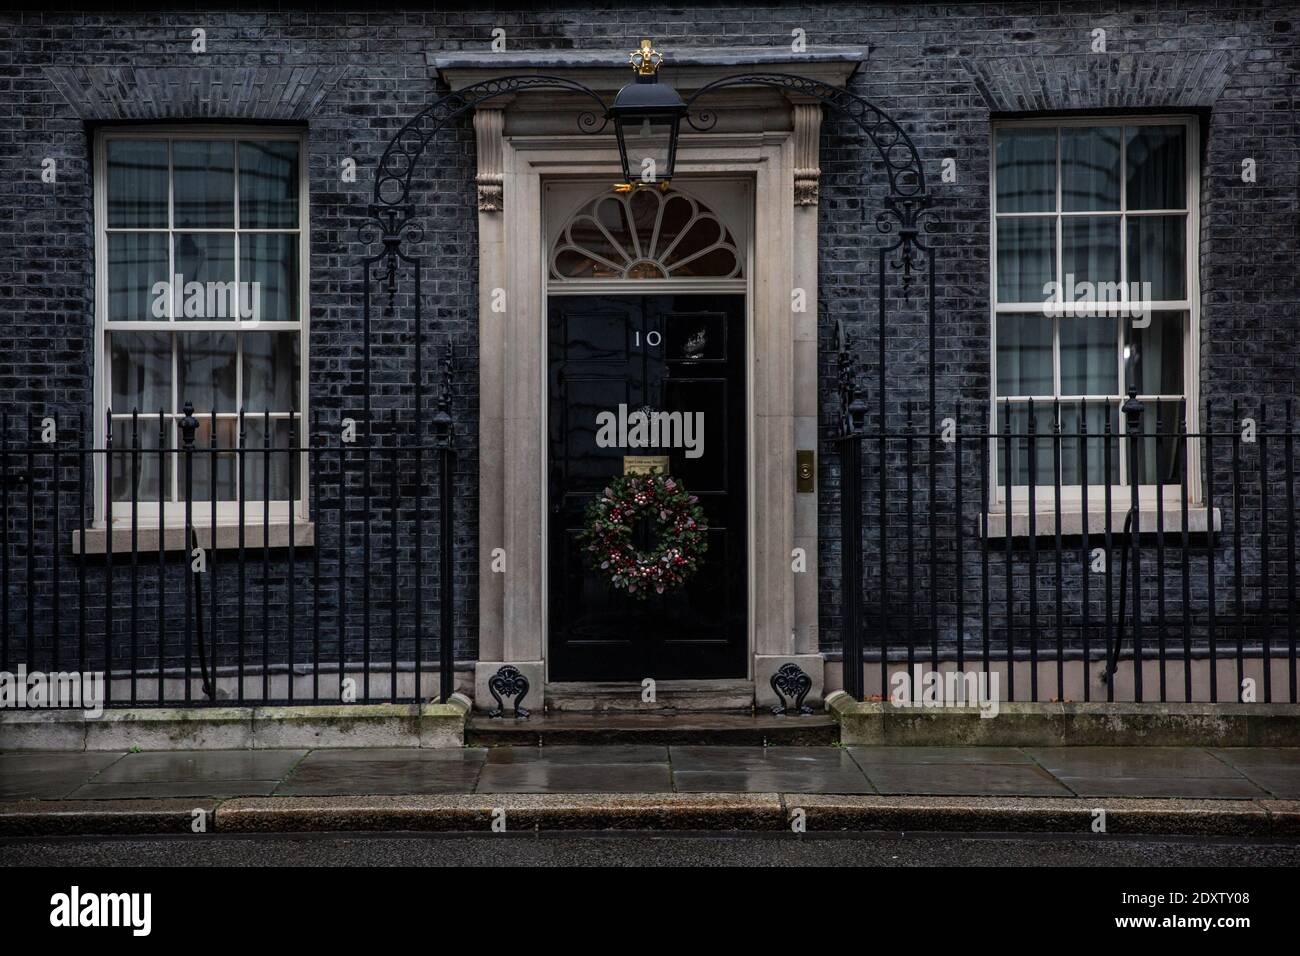 No.10 Downing Street awaits a trade deal between the UK Government and the EU Commission to seal the Brexit Stock Photo